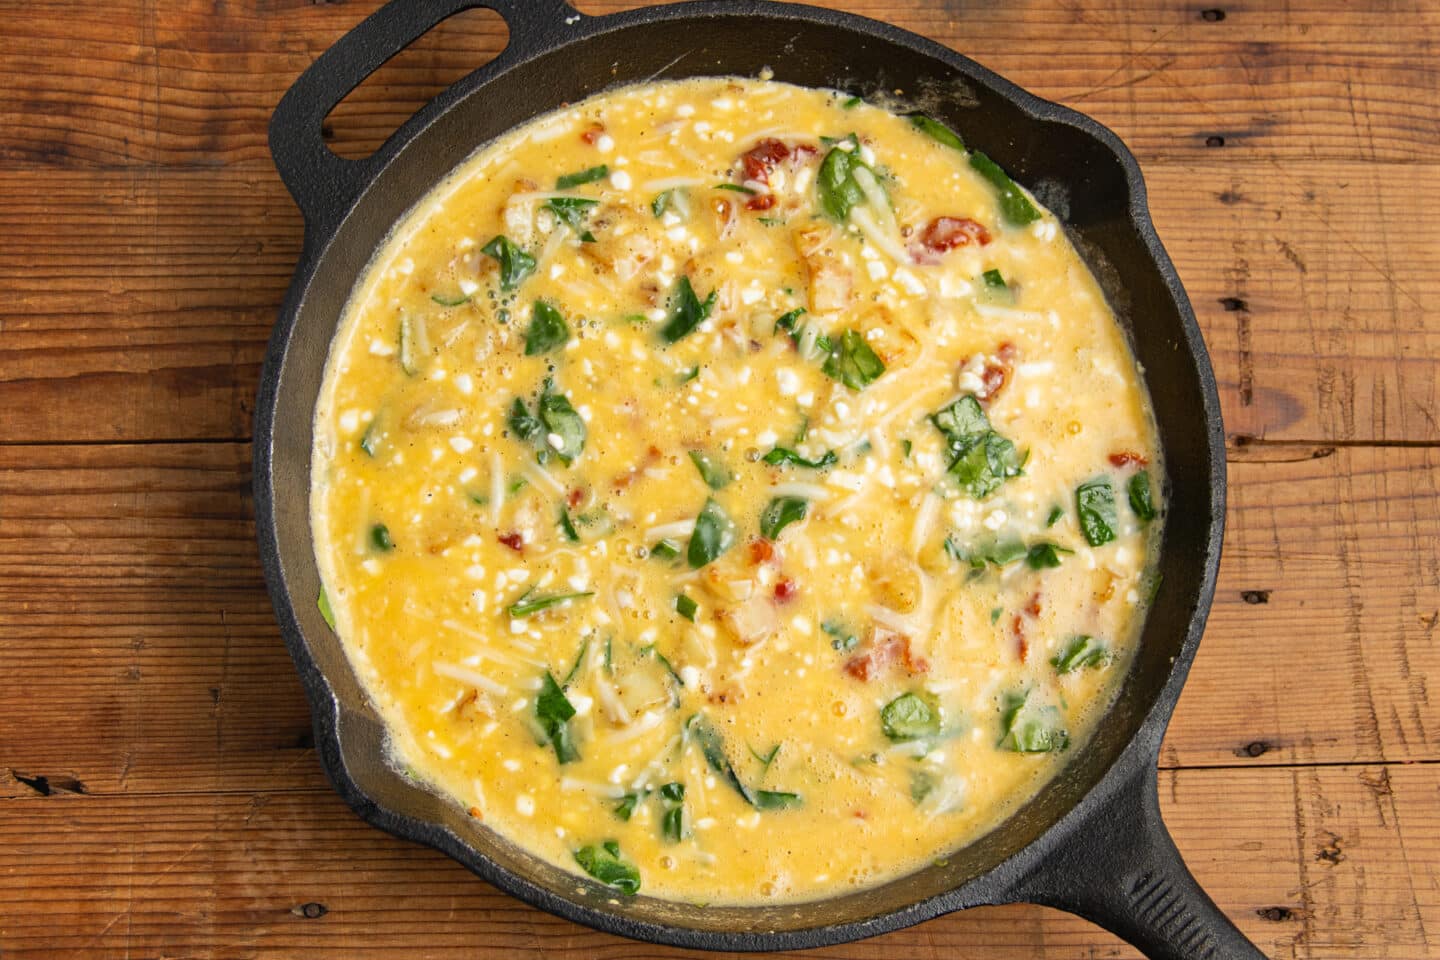 This is a picture of the skillet with added egg mixture.